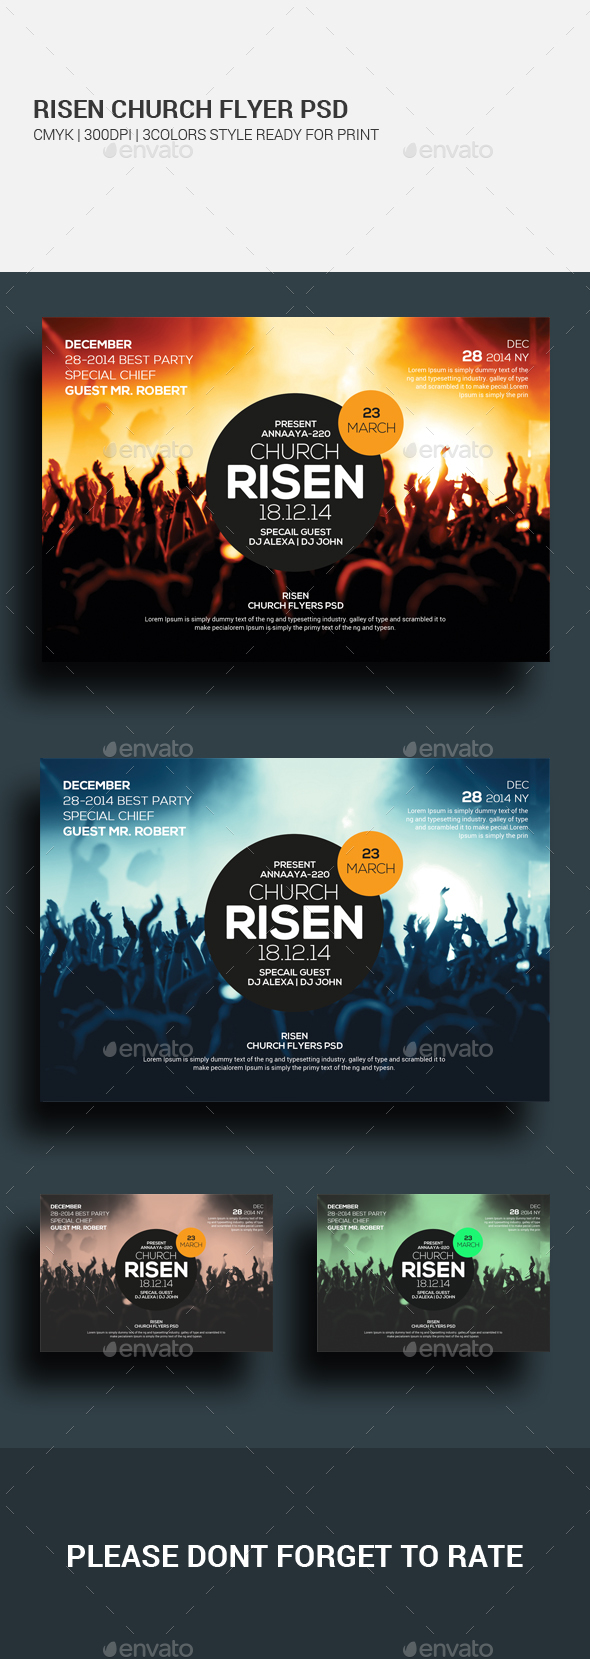 Easter Sunday Church Template Set With Easter Church Flyer Template